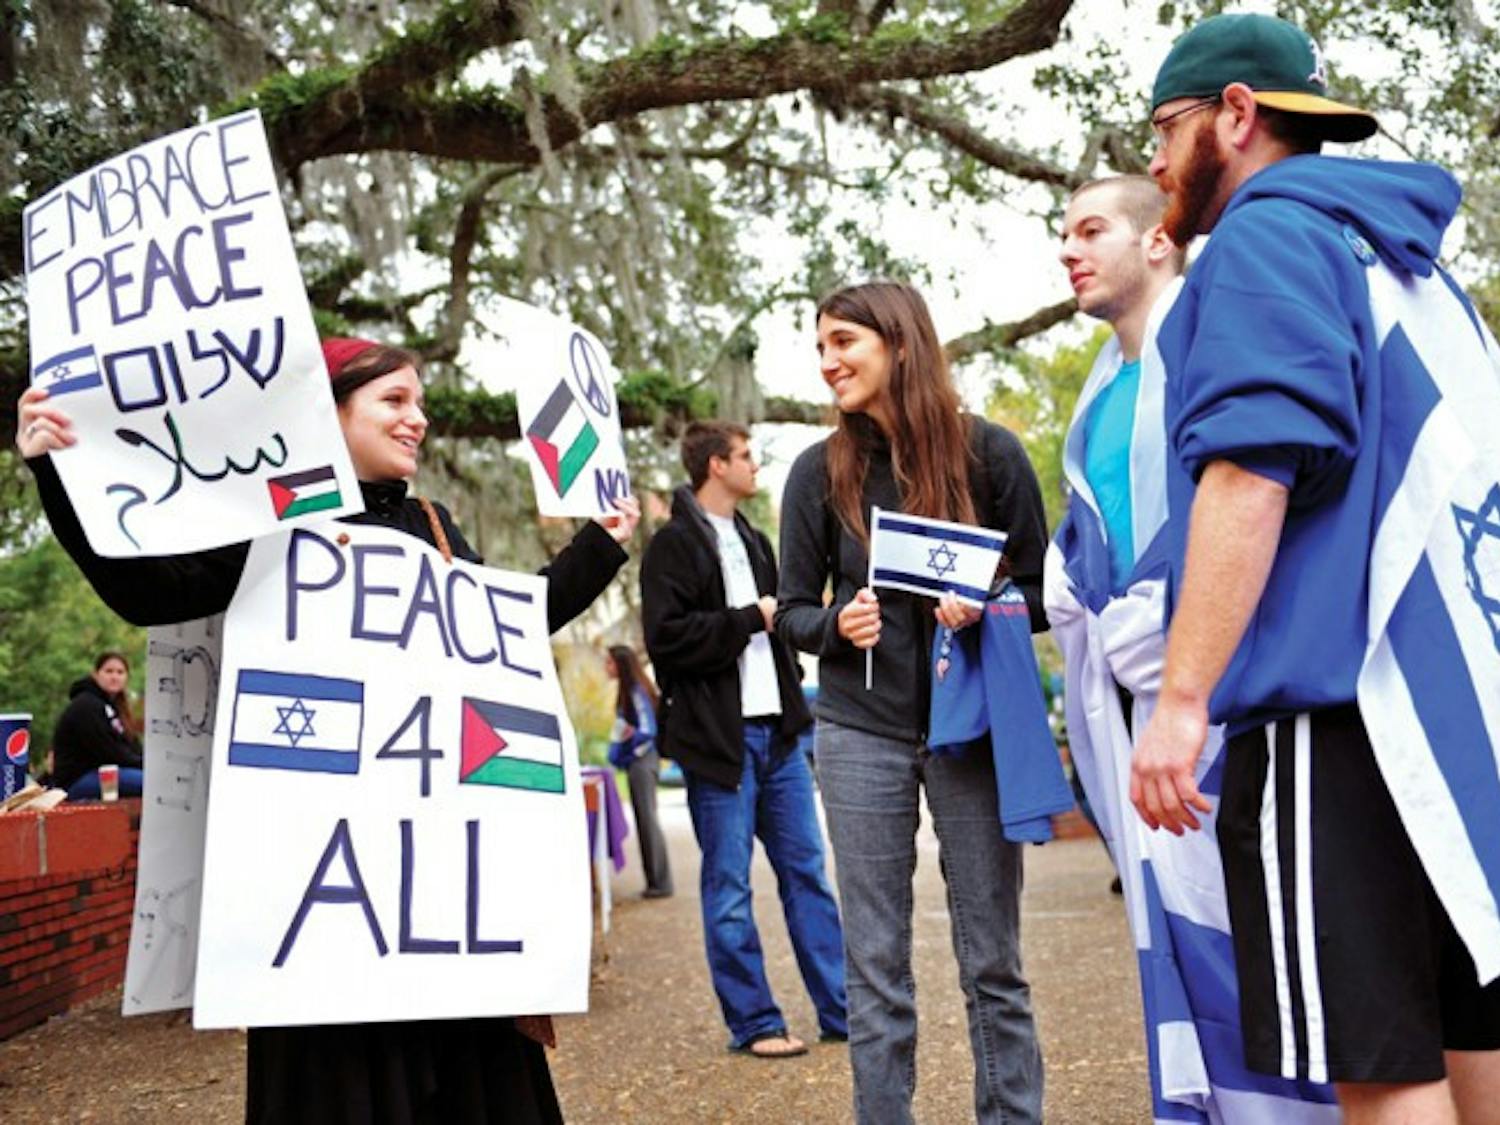 Jewish studies and political science student Jaimie Krass, 21, came independently to Turlington Plaza Thursday to promote peace during a rally split between support of Israel and Palestine. "Both sides are so preoccupied with pointing fingers," Krass said. "We've forgotten to come together for a common goal: peace."